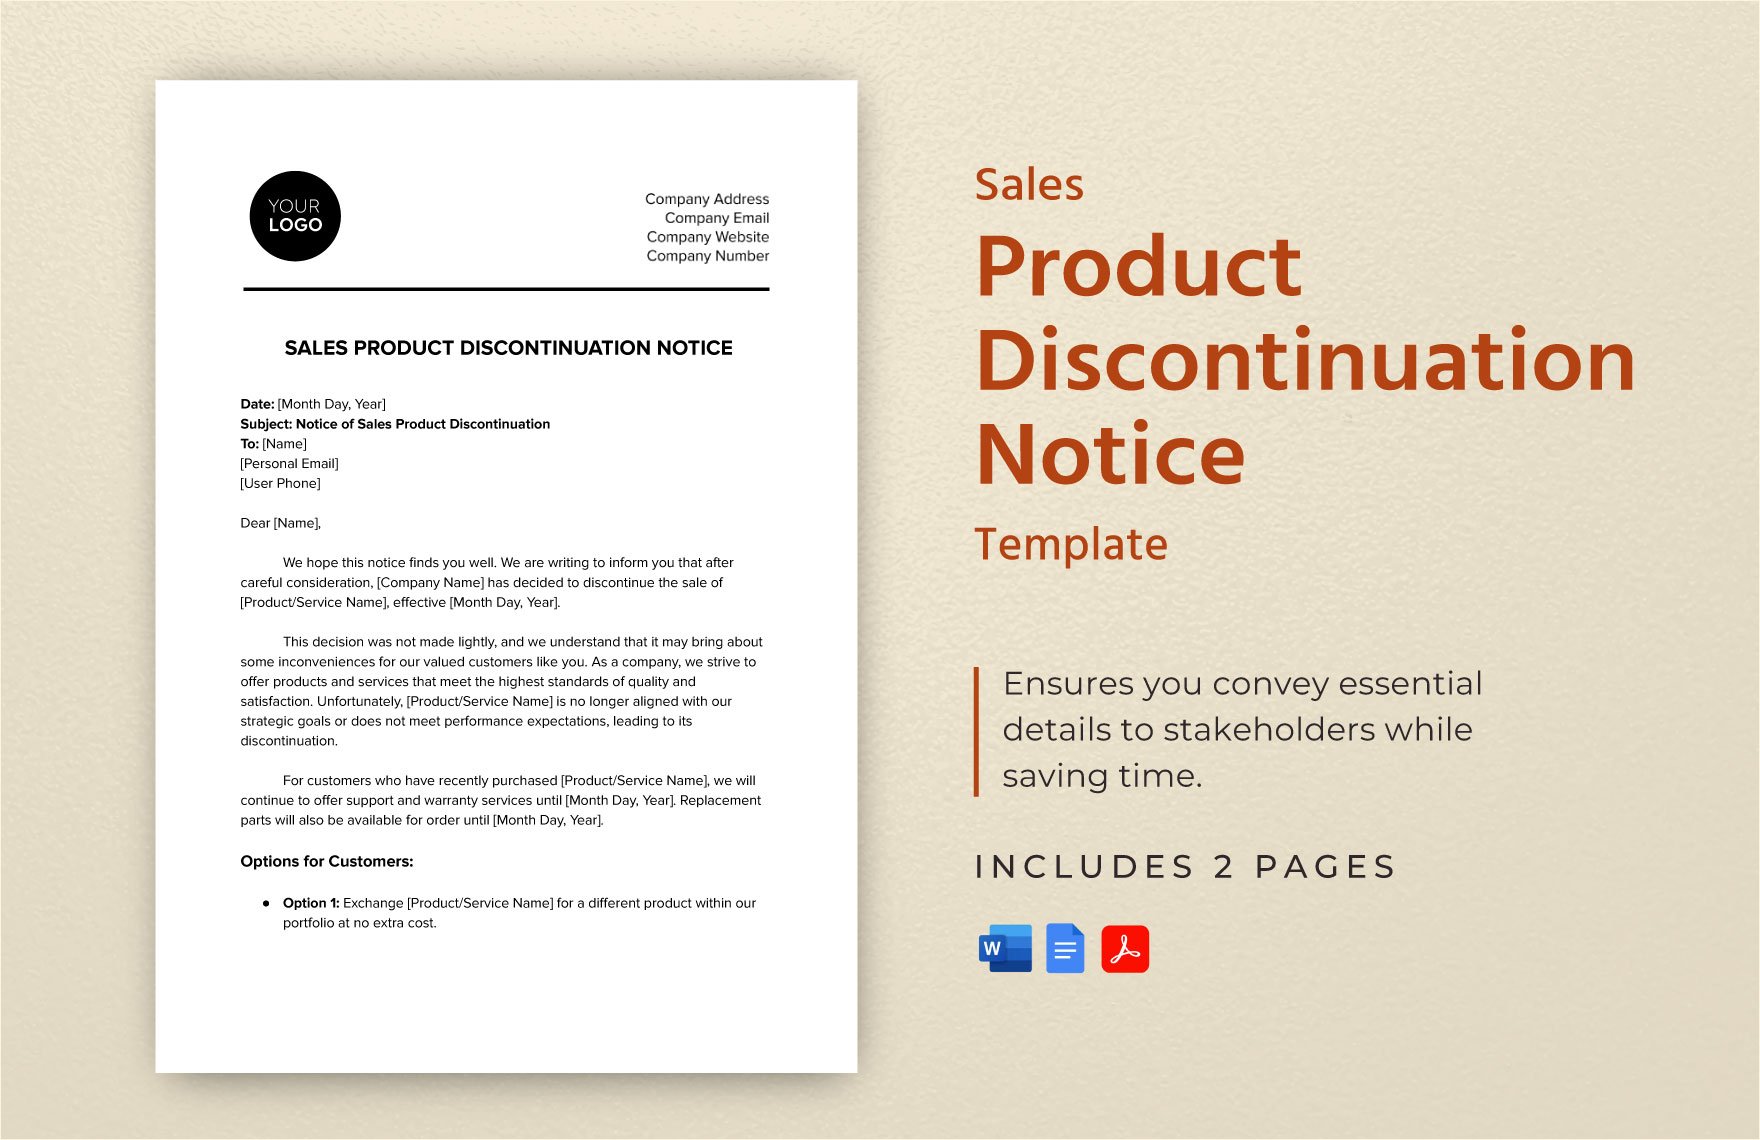 Sales Product Discontinuation Notice Template